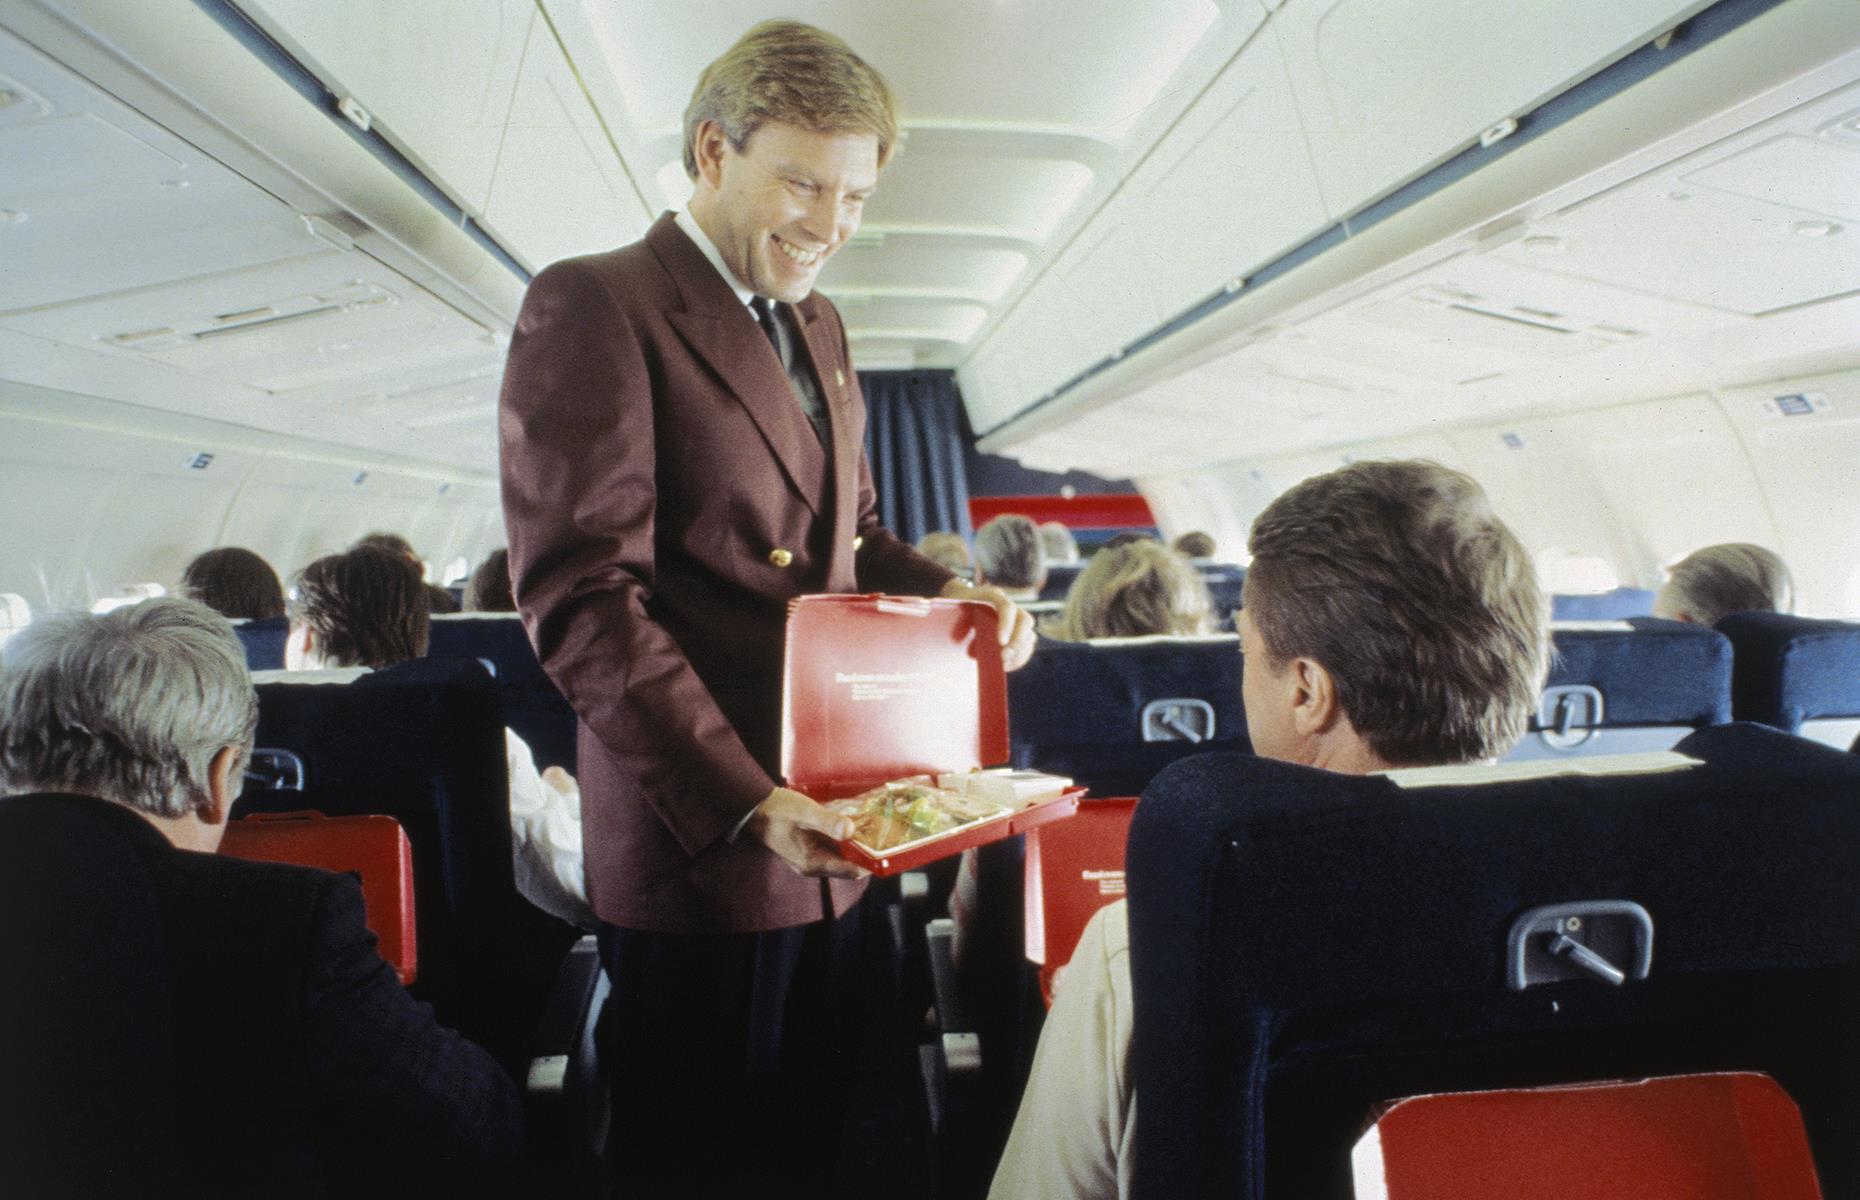 Slide 40 of 51: Through this decade, as flying became more and more commonplace, the economy class cabin looked much as it does today. Lavish, multi-course meals had been mostly replaced with more humble dinners served from boxes or trays. This photo shows an SAS flight attendant serving boxed meals to passengers.